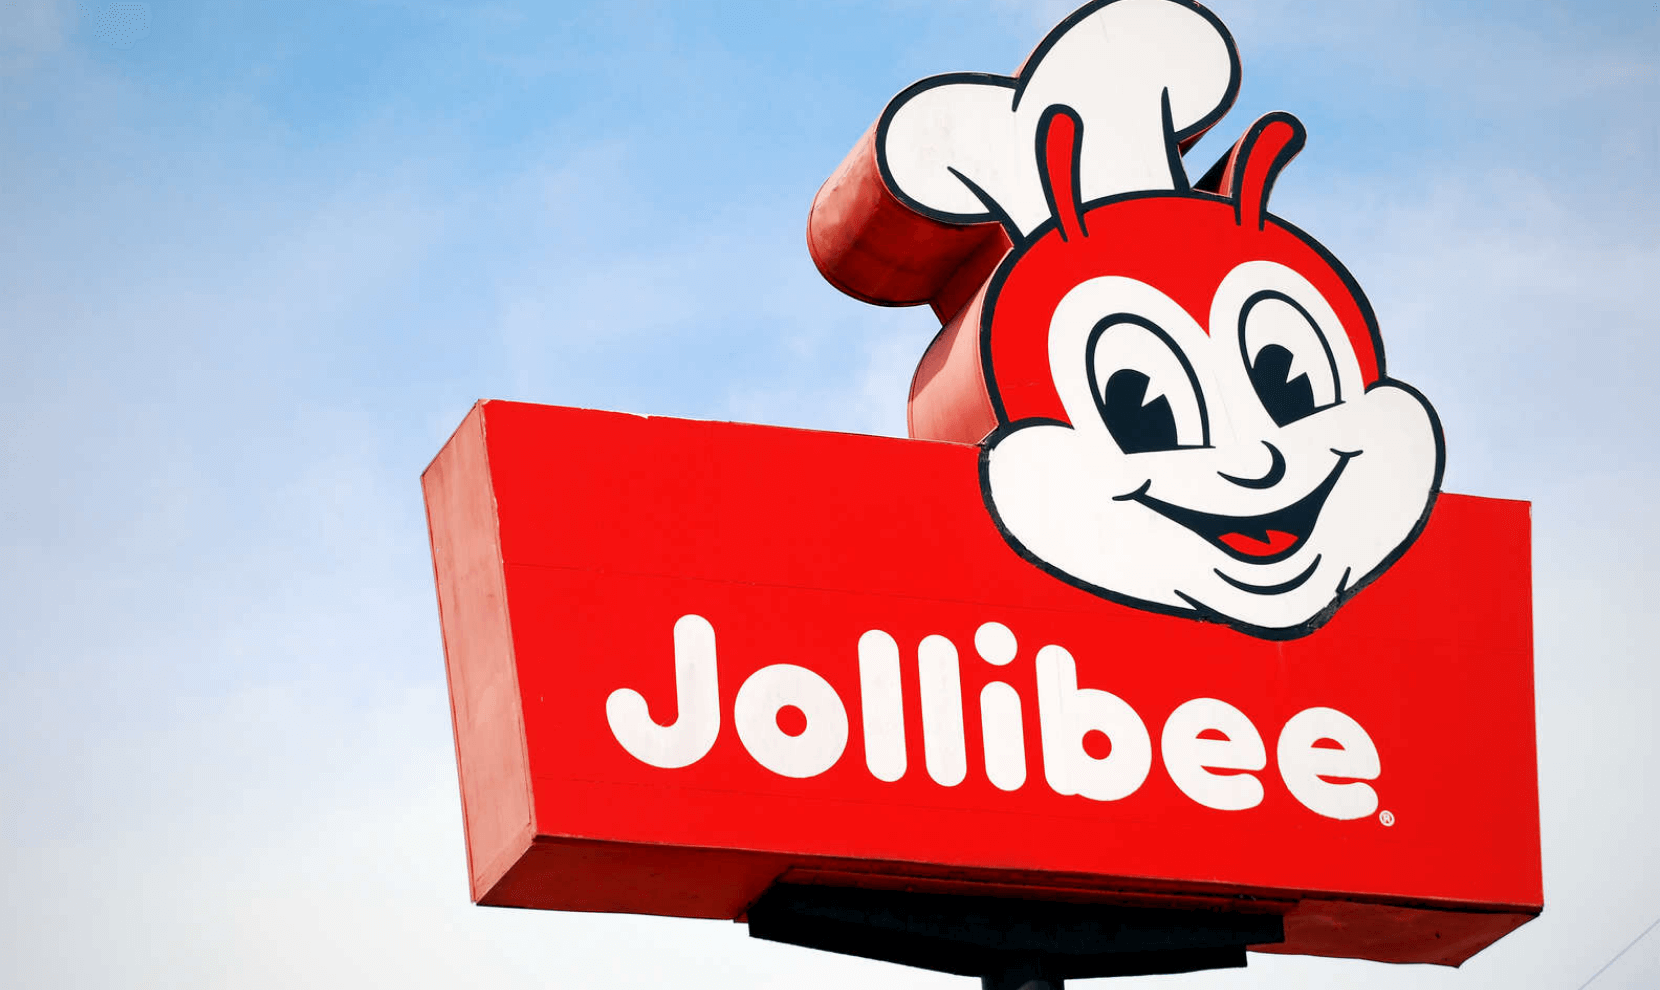 jollibees-history-and-growth-strategy-how-they-became-the-no-1-fast-food-restaurant-in-the-philippines